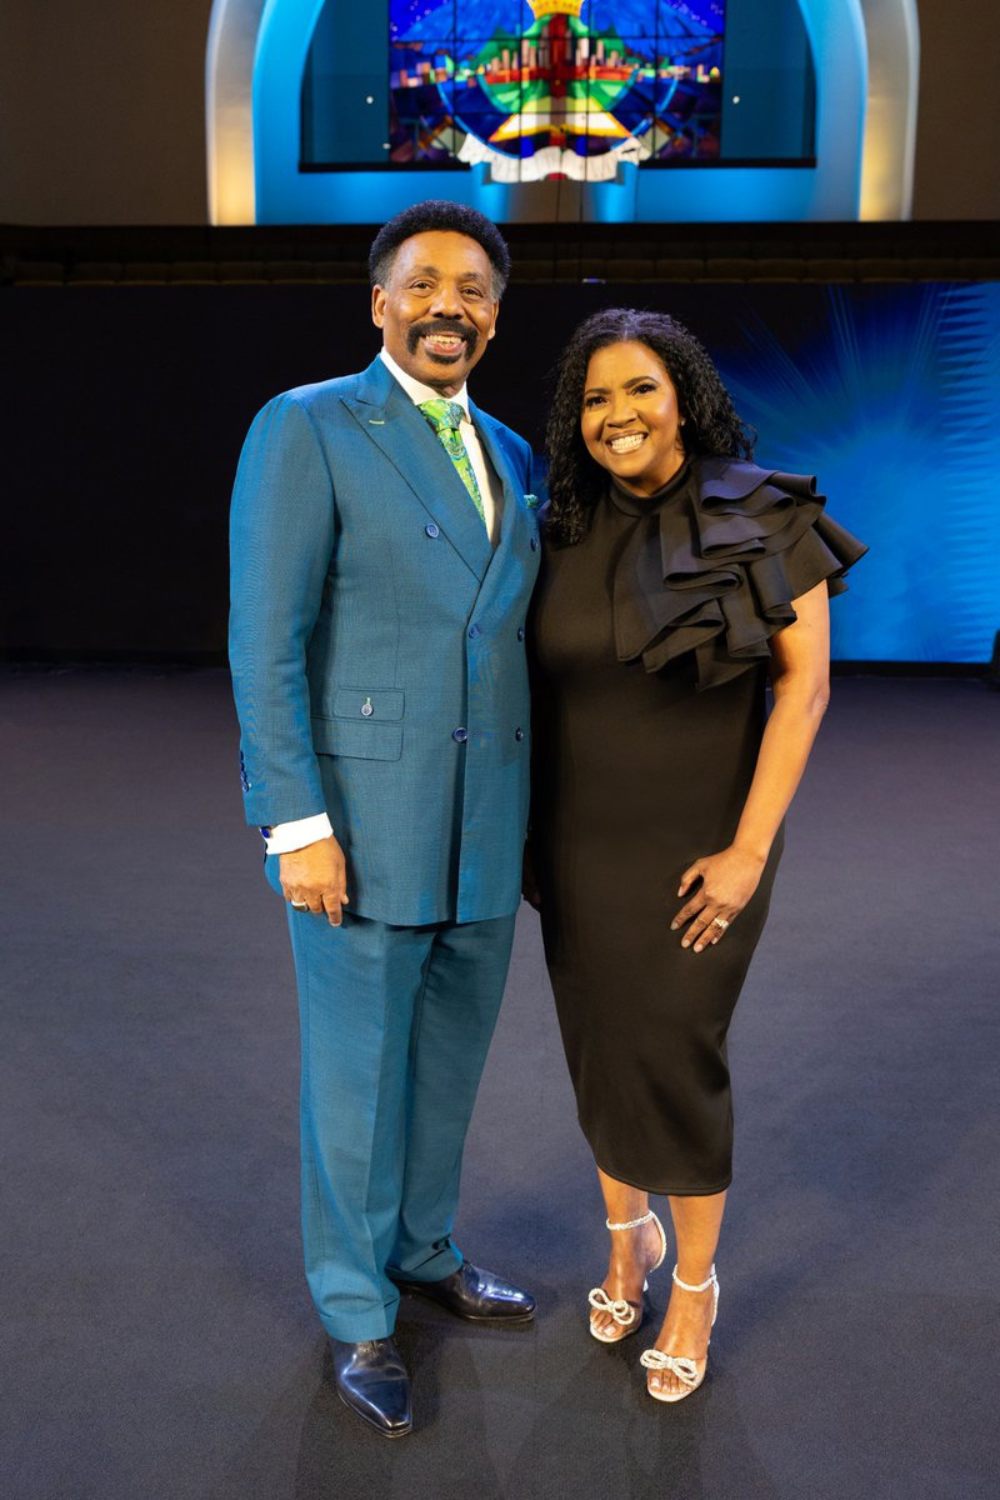 Dr. Tony Evans and wife Carla